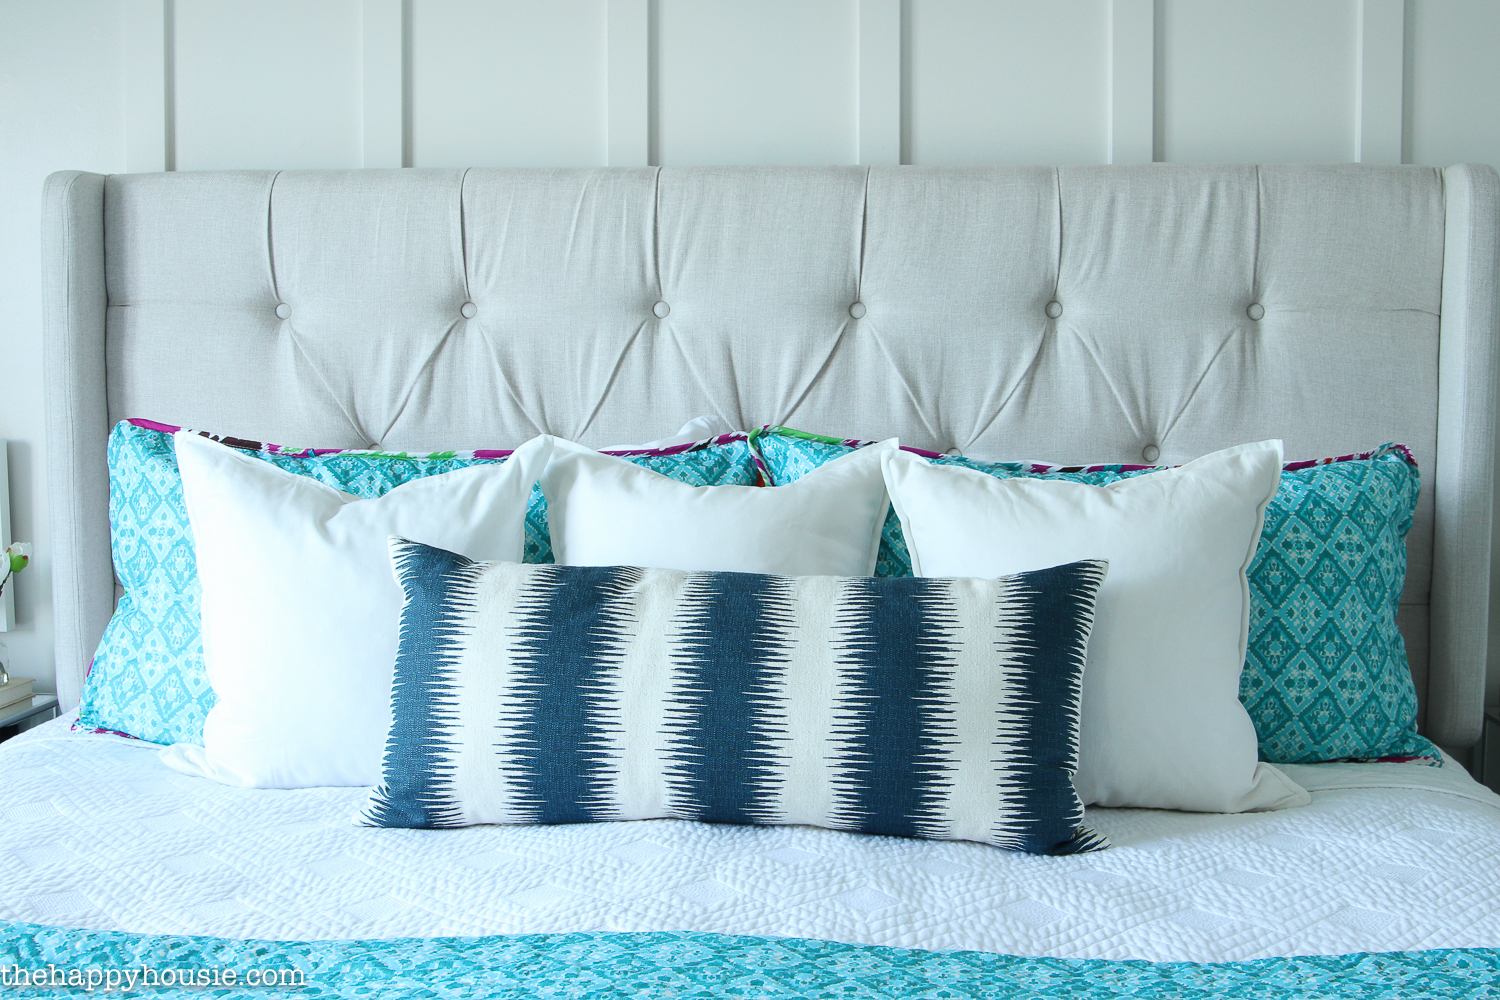 A comfy bed with throw pillows in blue and white.